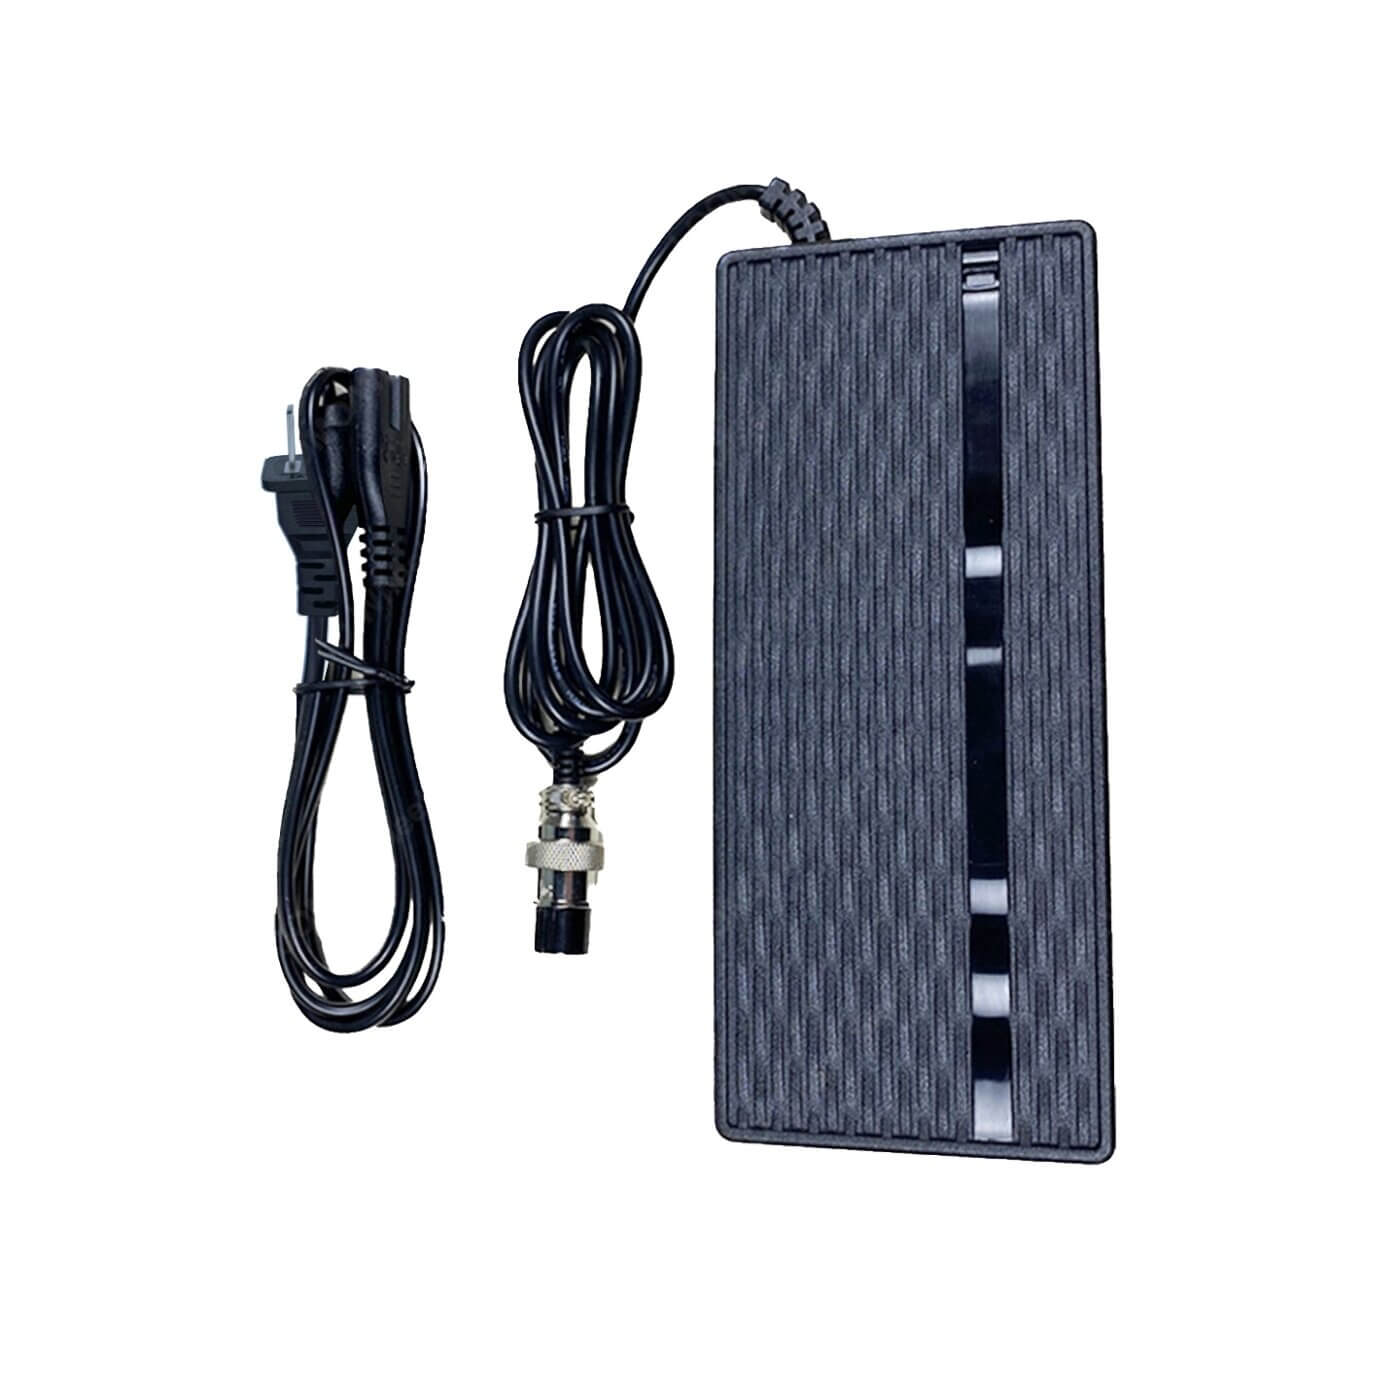 A power supply with a black cord attached to it.